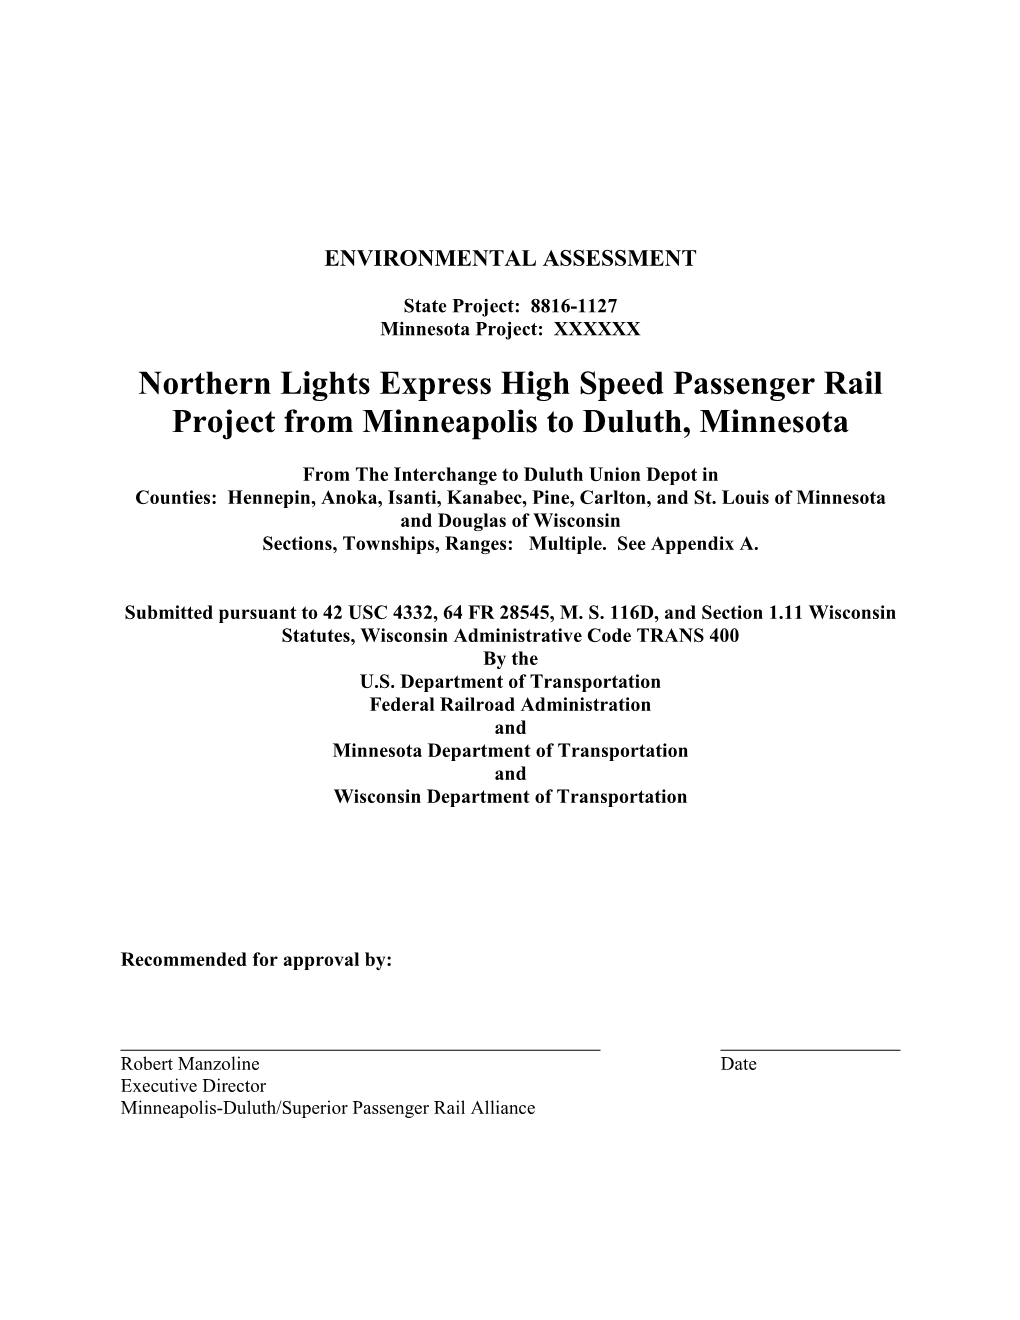 Northern Lights Express High Speed Passenger Rail Project from Minneapolis to Duluth, Minnesota